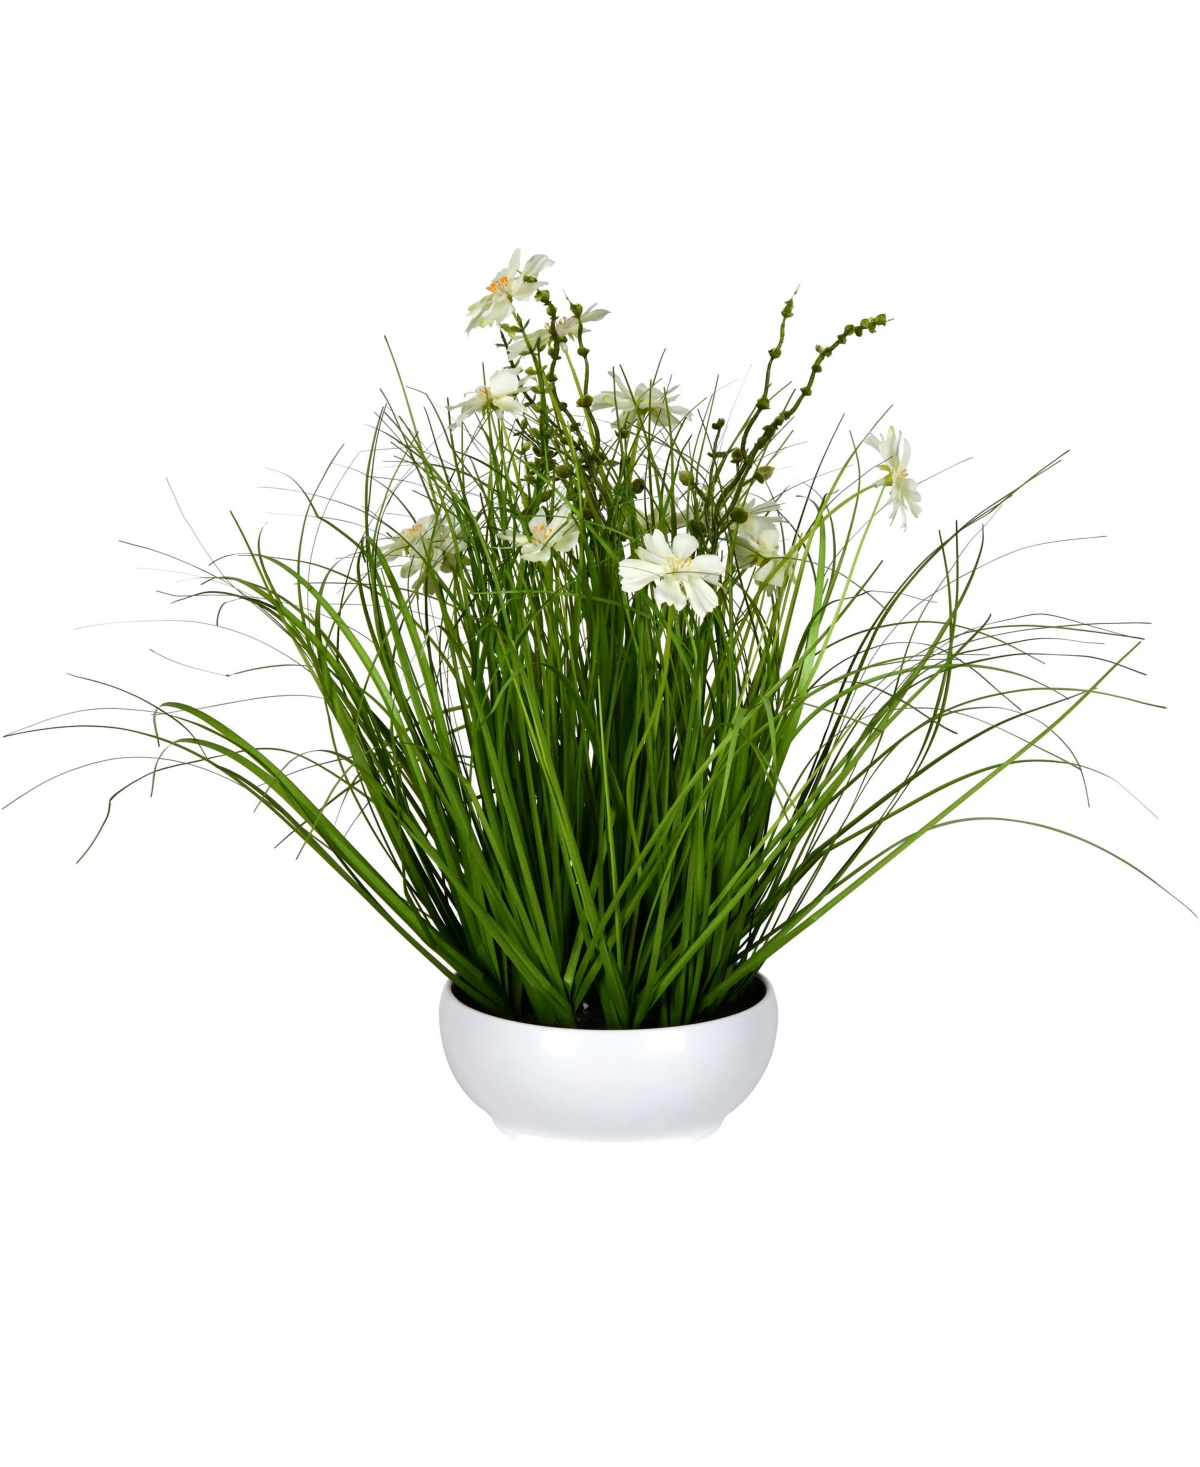 16.5" Artificial Potted Cream Cosmos and Green Grass. - Cream